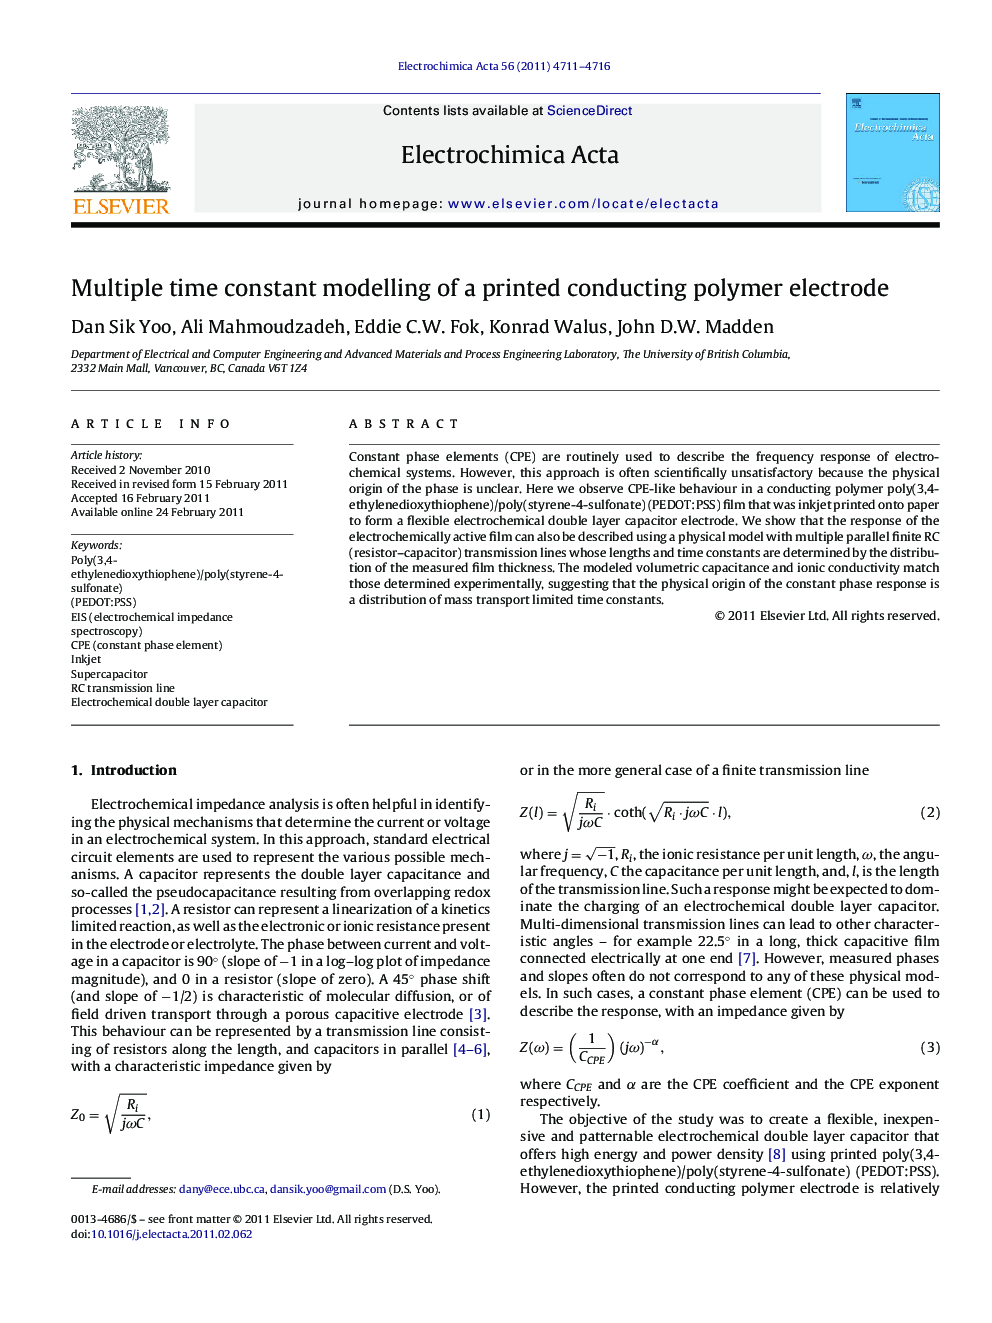 Multiple time constant modelling of a printed conducting polymer electrode